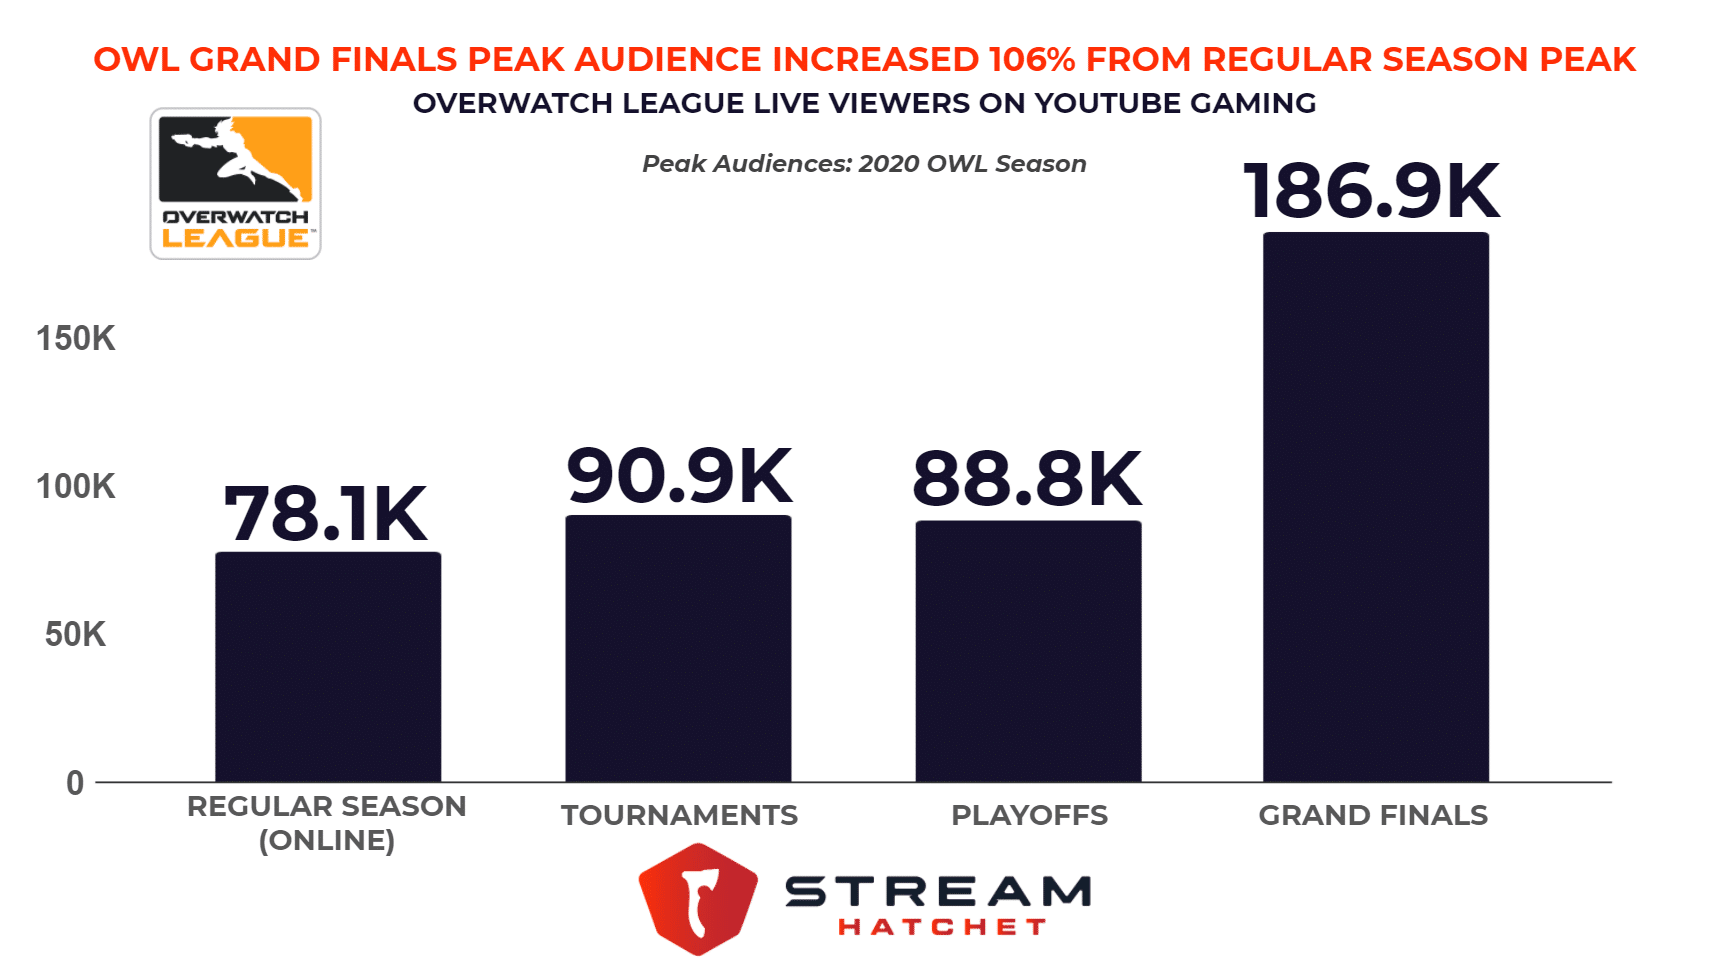 Overwatch League Double Peak Audience At Grand Finals